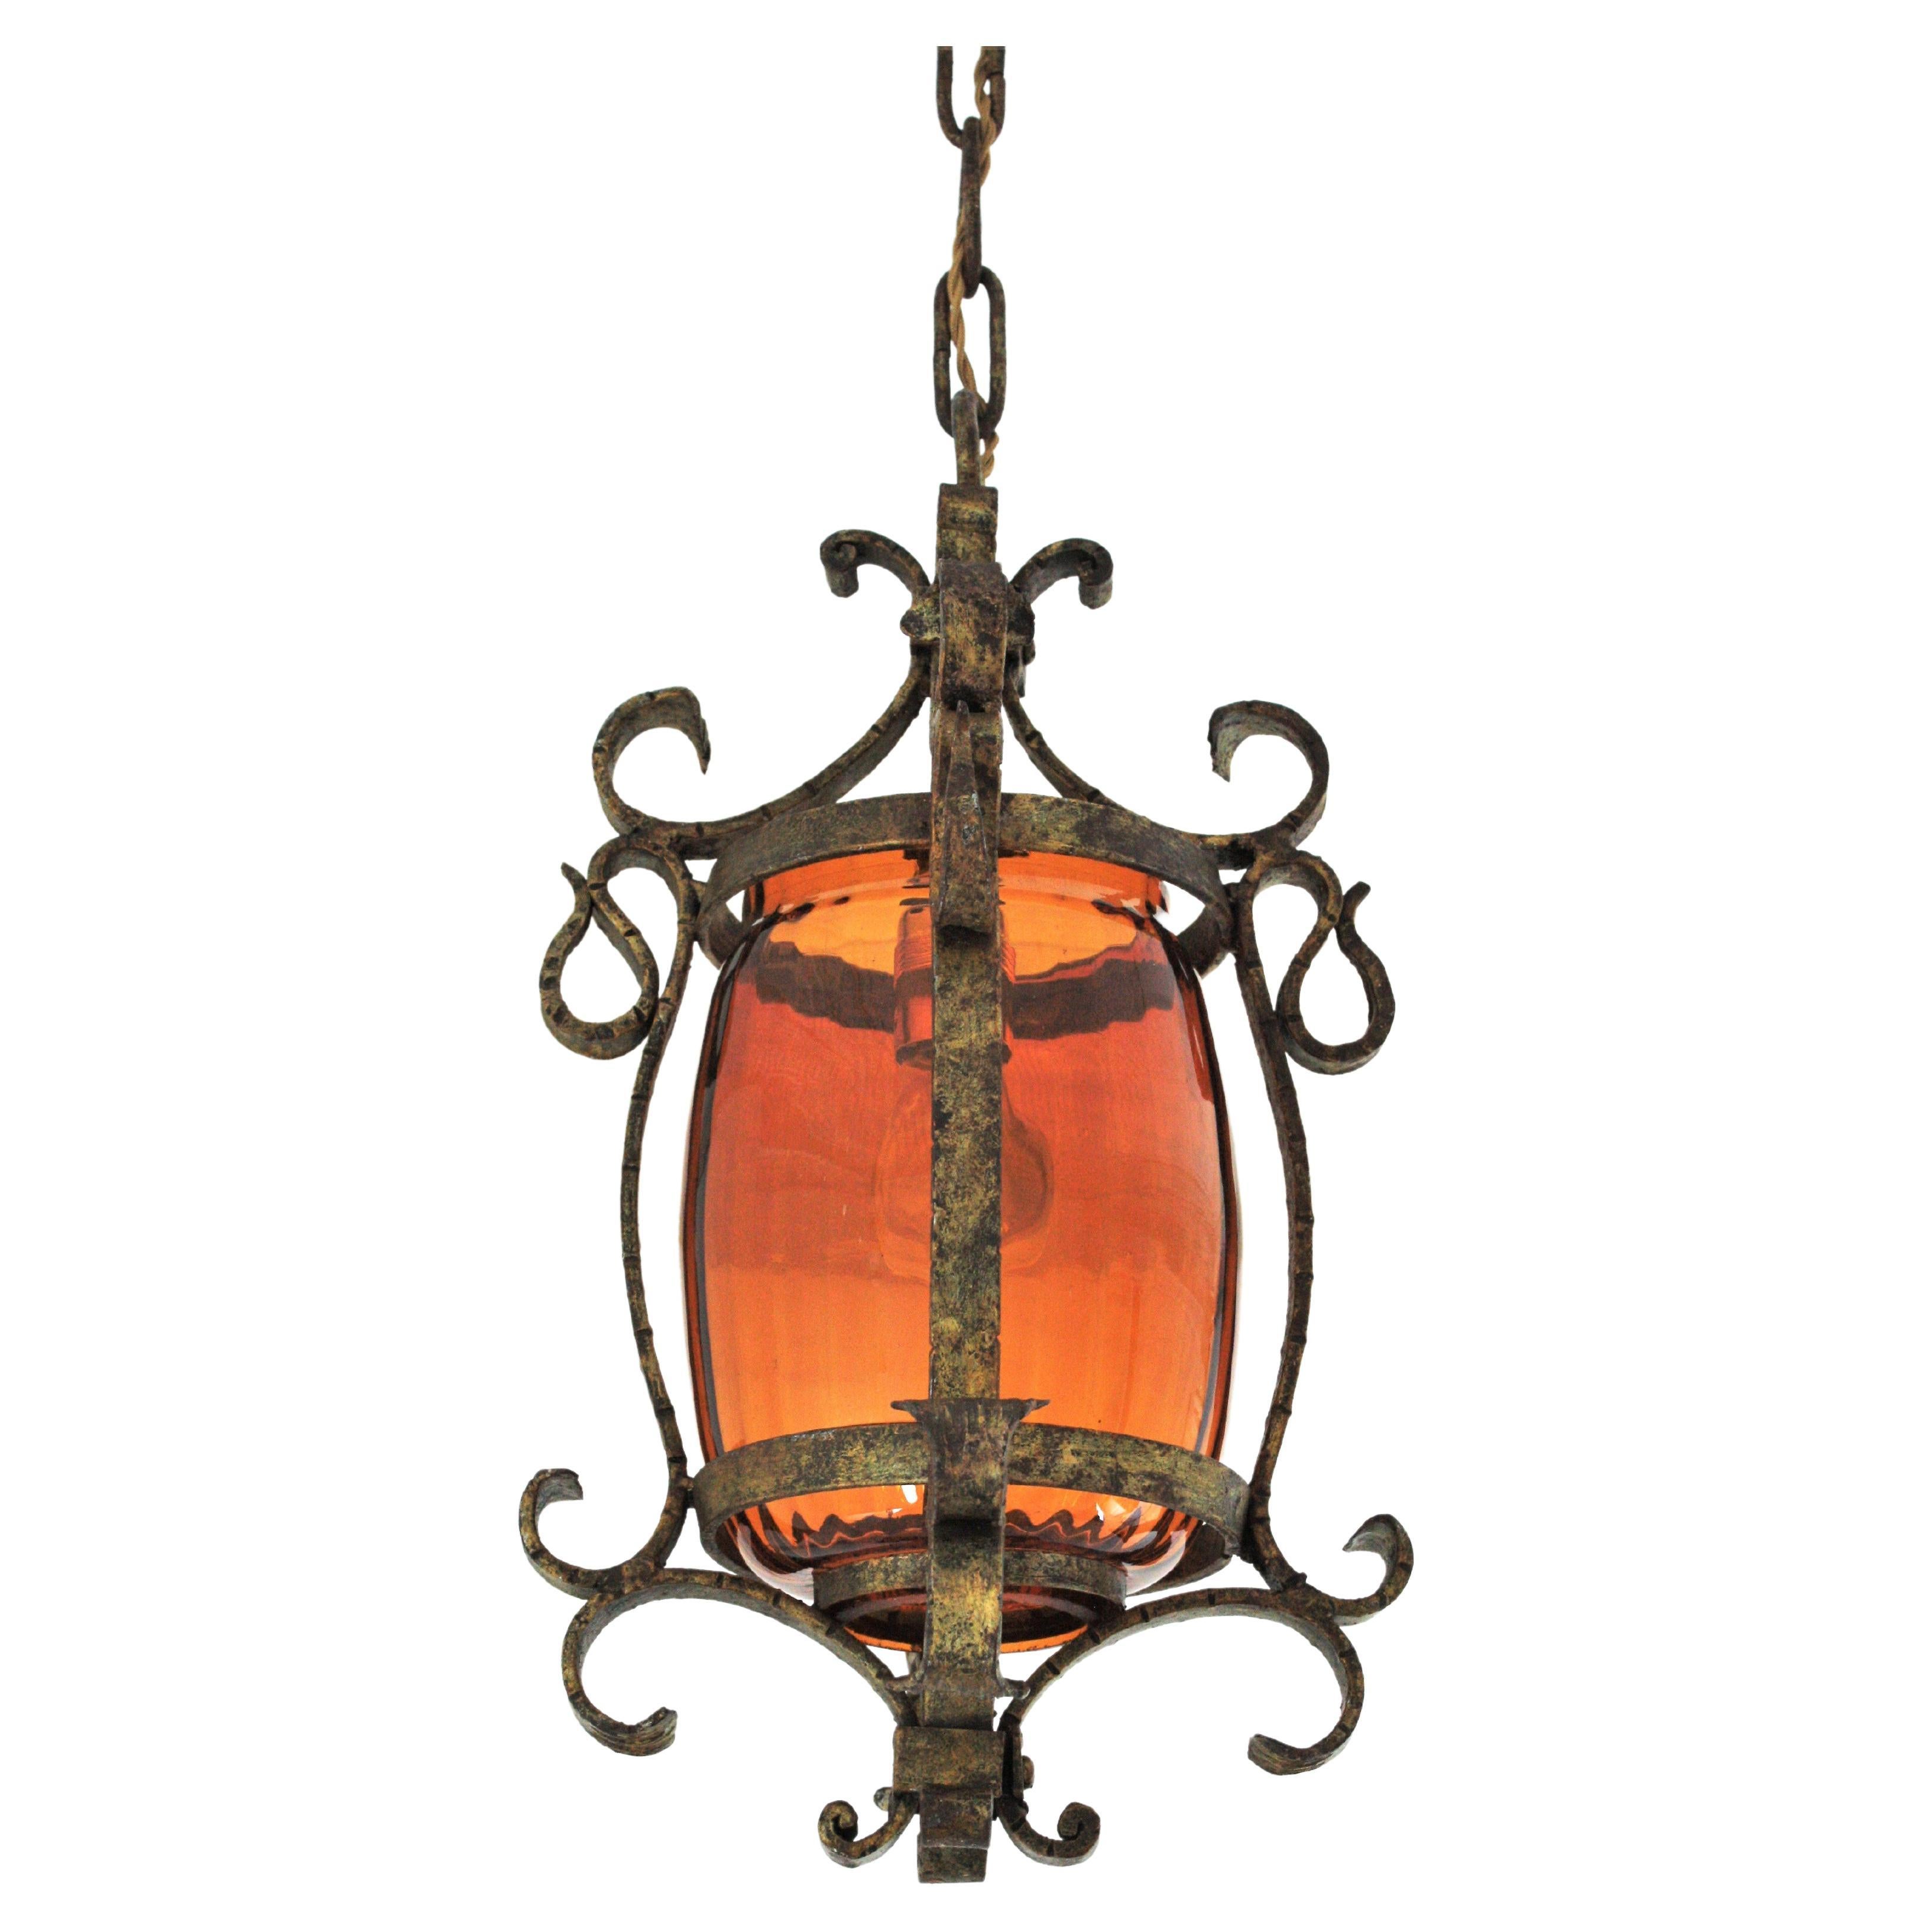 Sculptural gilt iron pendant / lantern with amber blown glass cylinder lampshade, Spain, 1930s.
This spanish hanging light features a wrought iron structure with scroll details hanging from a chain topped by a git iron canopy. An inner blown glass